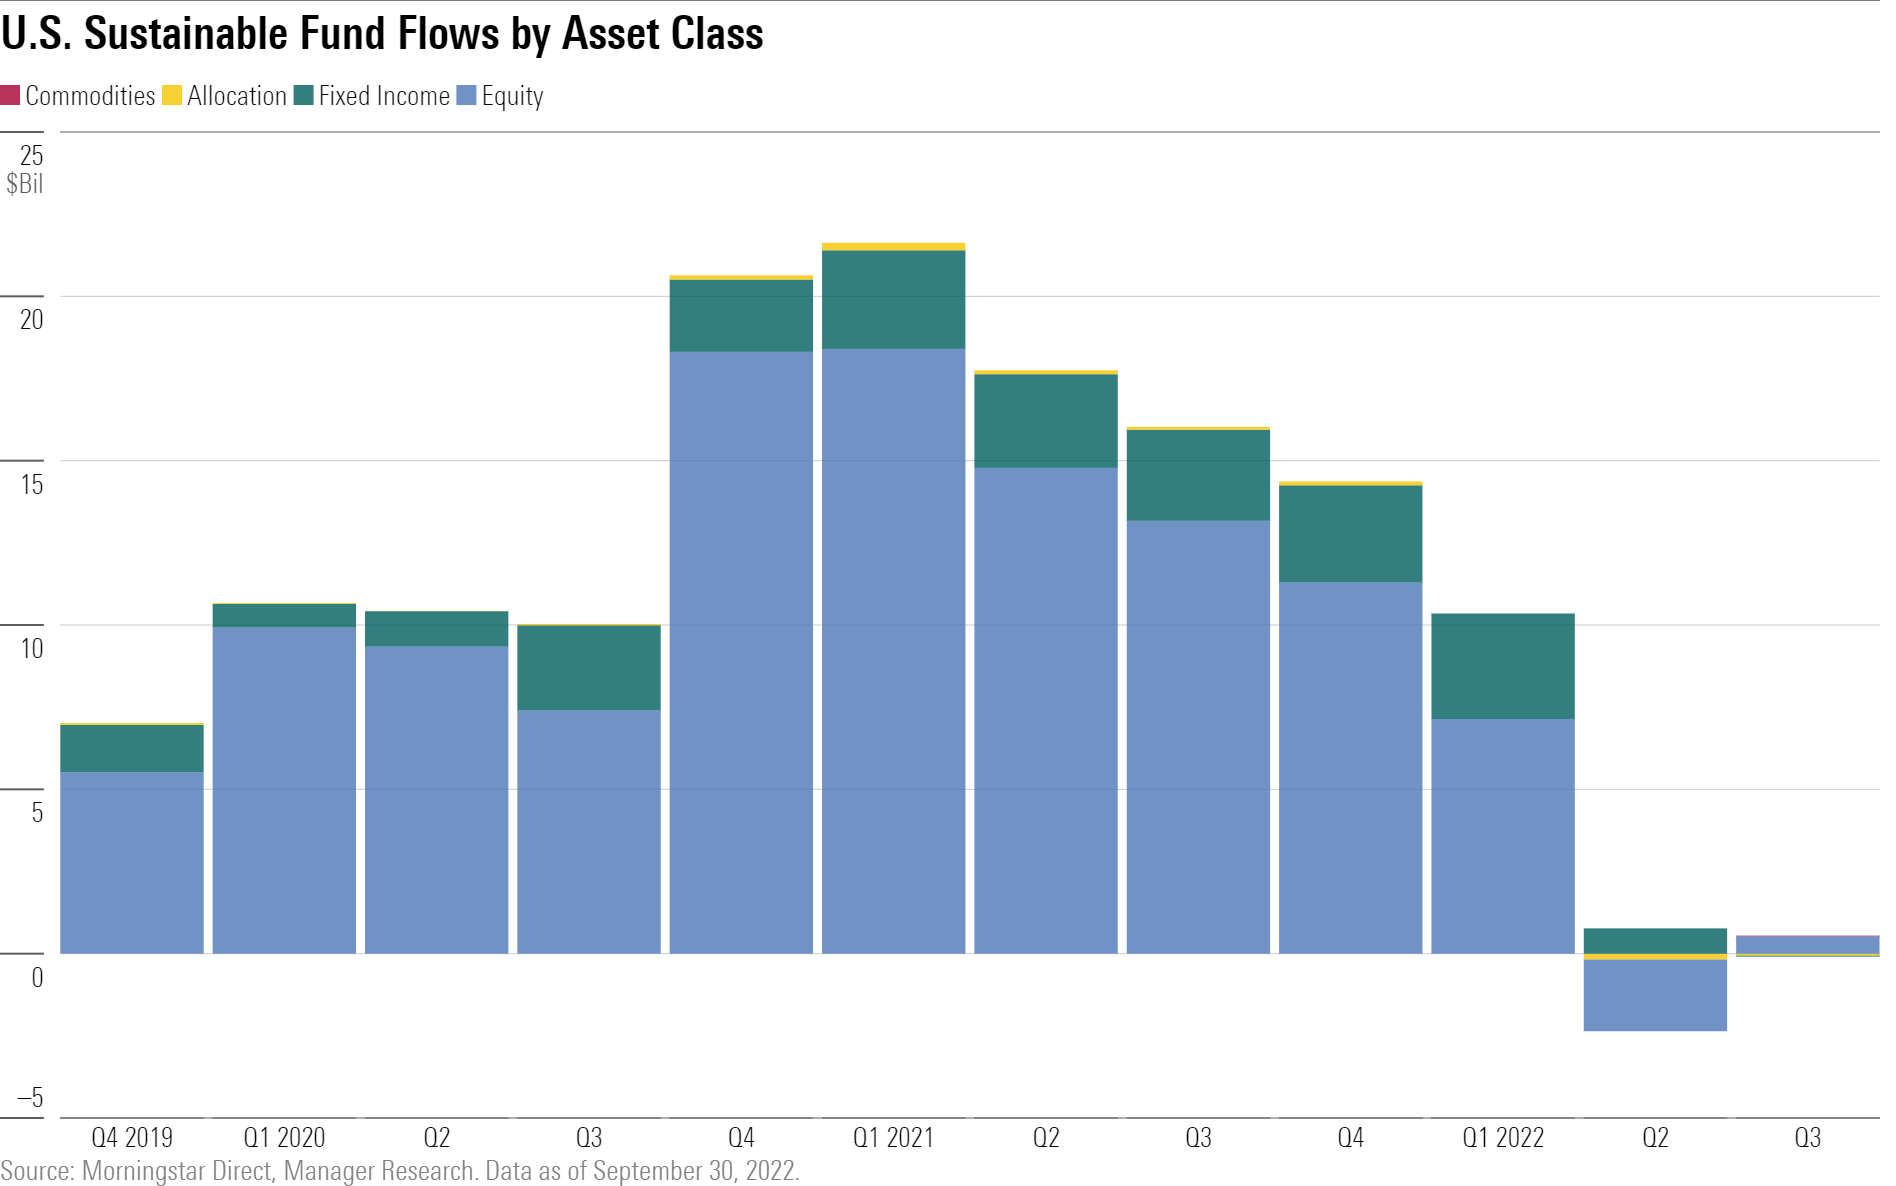 Flows into sustainable fixed-income funds were on a steady upward trajectory until the Fed started raising rates in early 2022. During the third quarter, sustainable bond funds lost $27 million, their first quarter of outflows in more than three years.